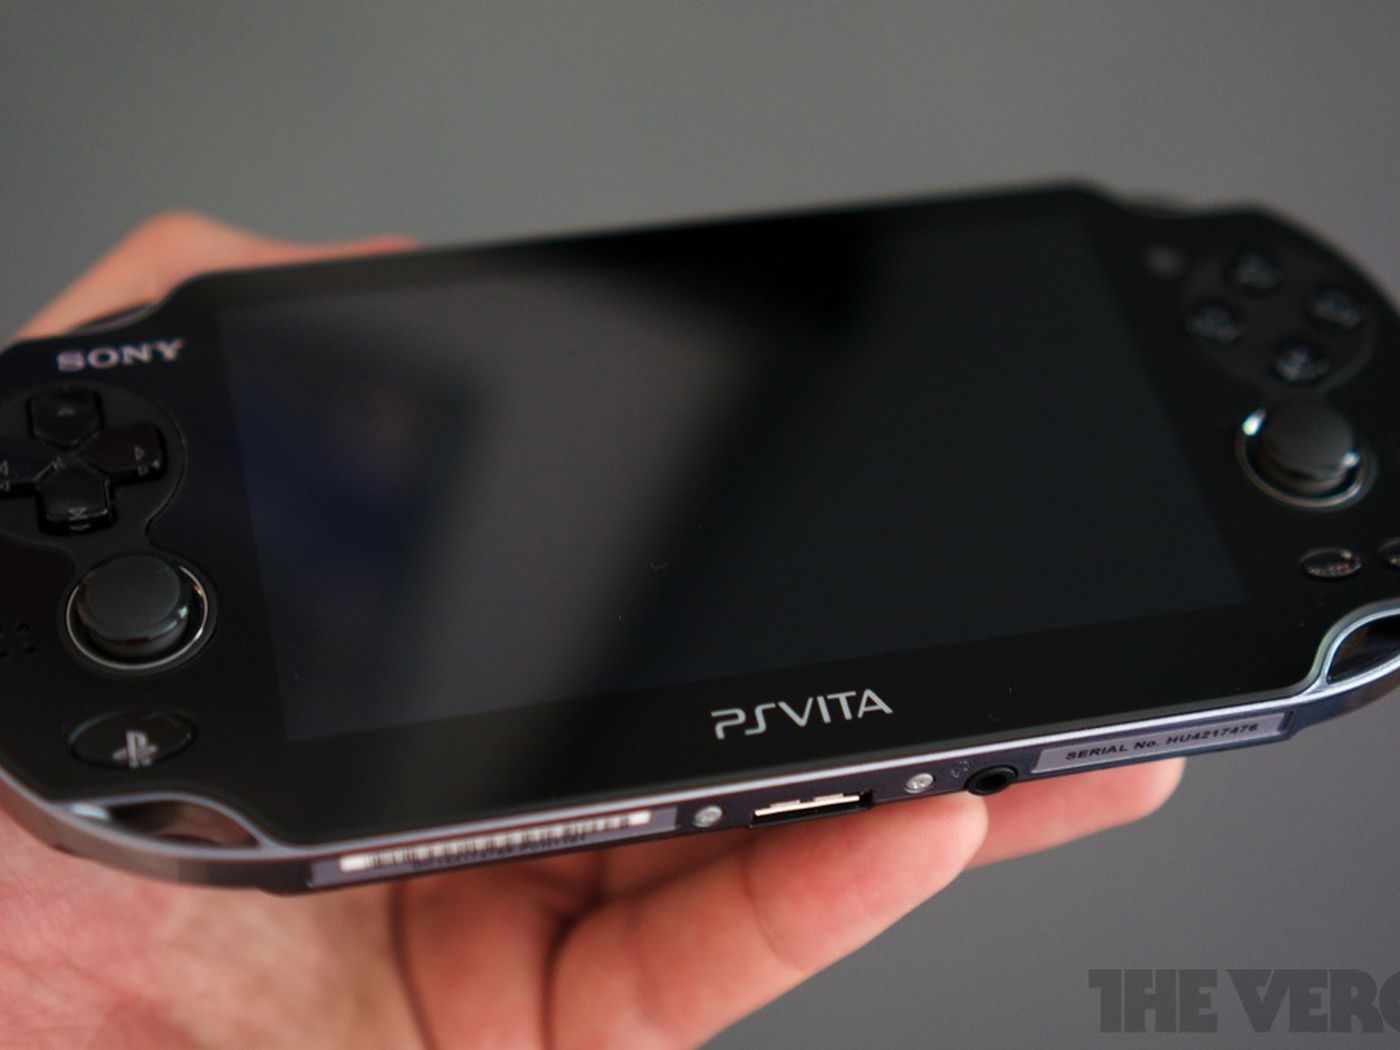 Can You Play Fortnite On Ps Vita Without Ps4 Sony Cuts Ps Vita Price To 199 99 Reduces Cost Of Memory Cards The Verge